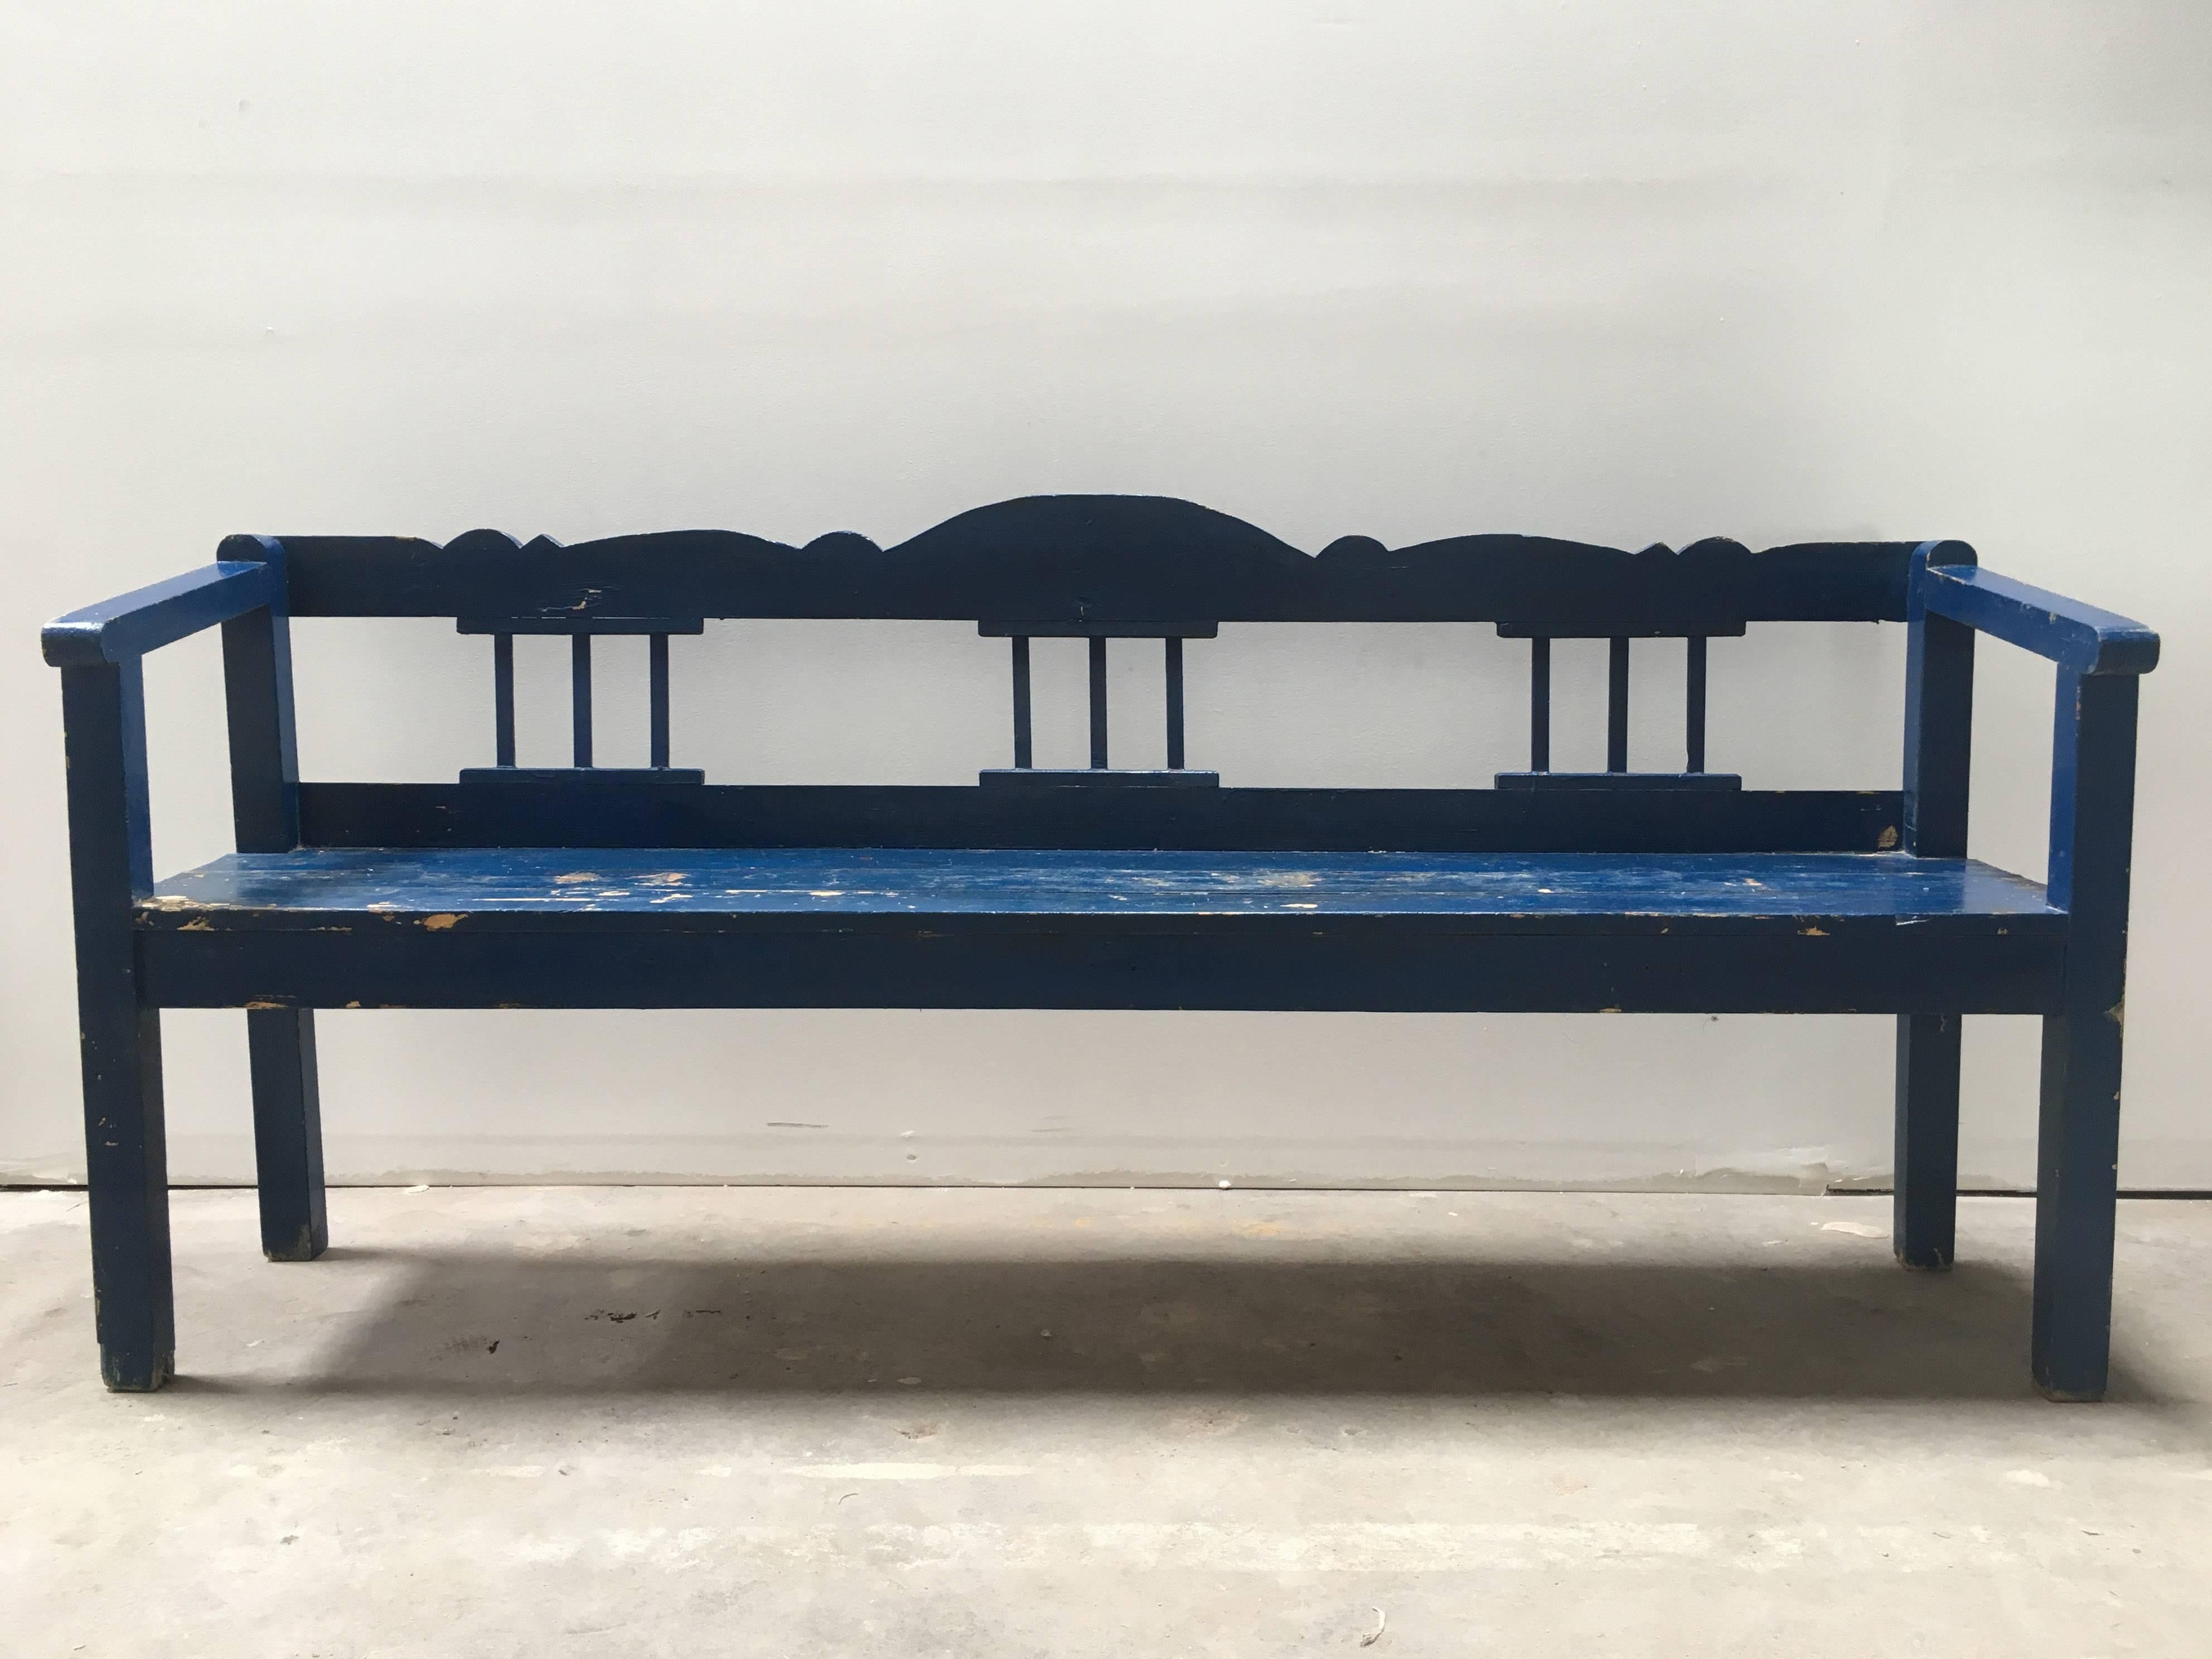 Painted a vibrant blue and worn to rustic perfection, this 19th century European farm bench is perfect for gardens, banquet dining, indoor or outdoor.